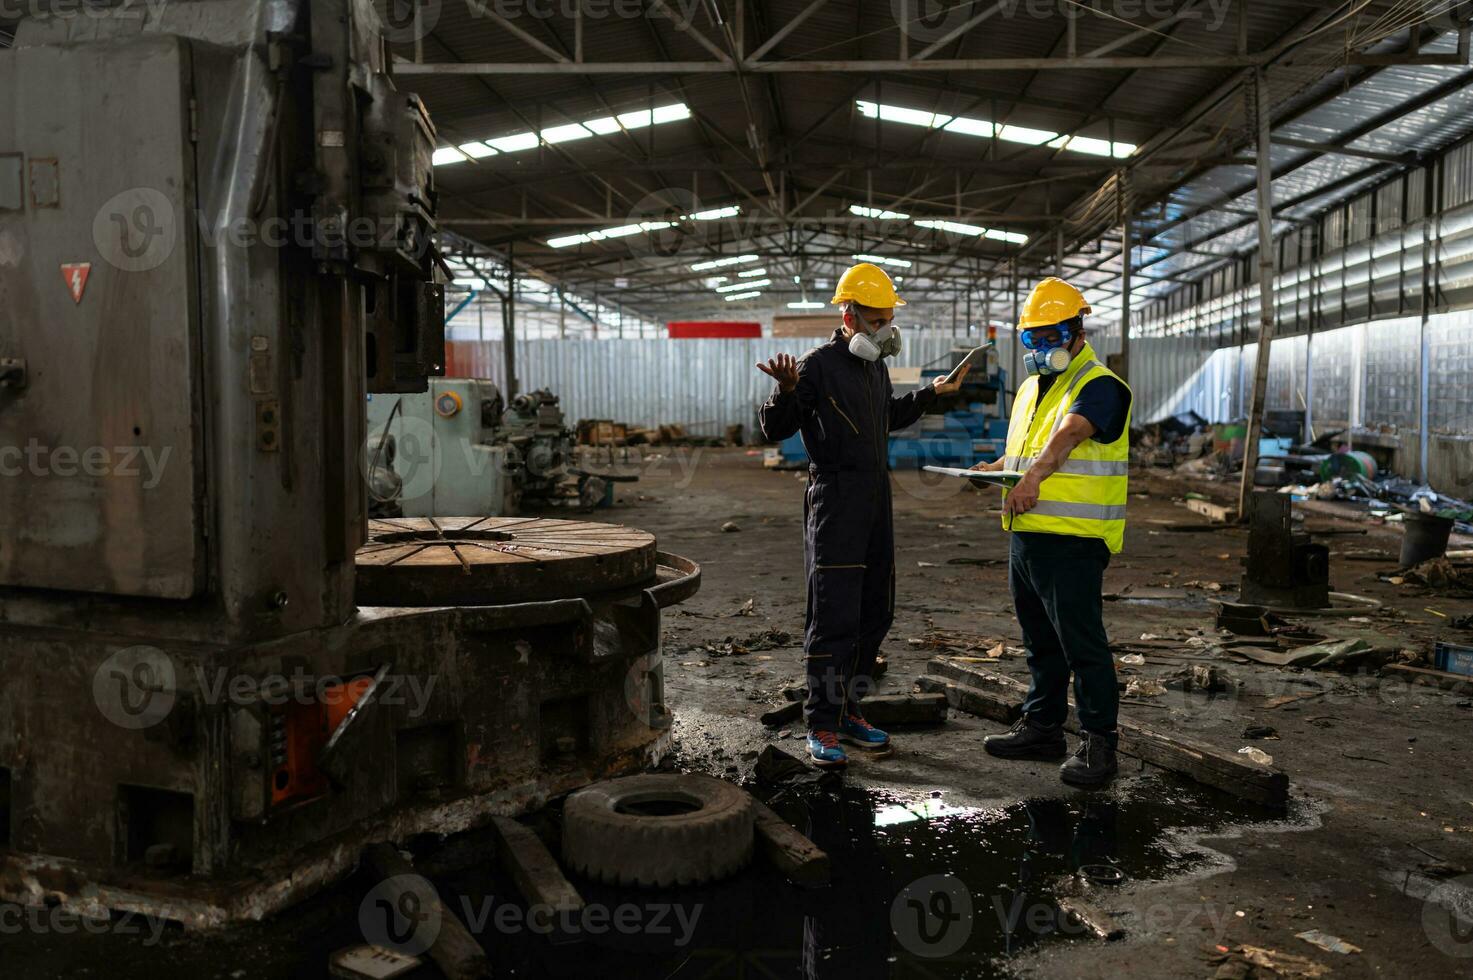 Scientists and government officials Inspect and collect chemical leak samples in industrial sites. to be thoroughly investigated in the laboratory photo